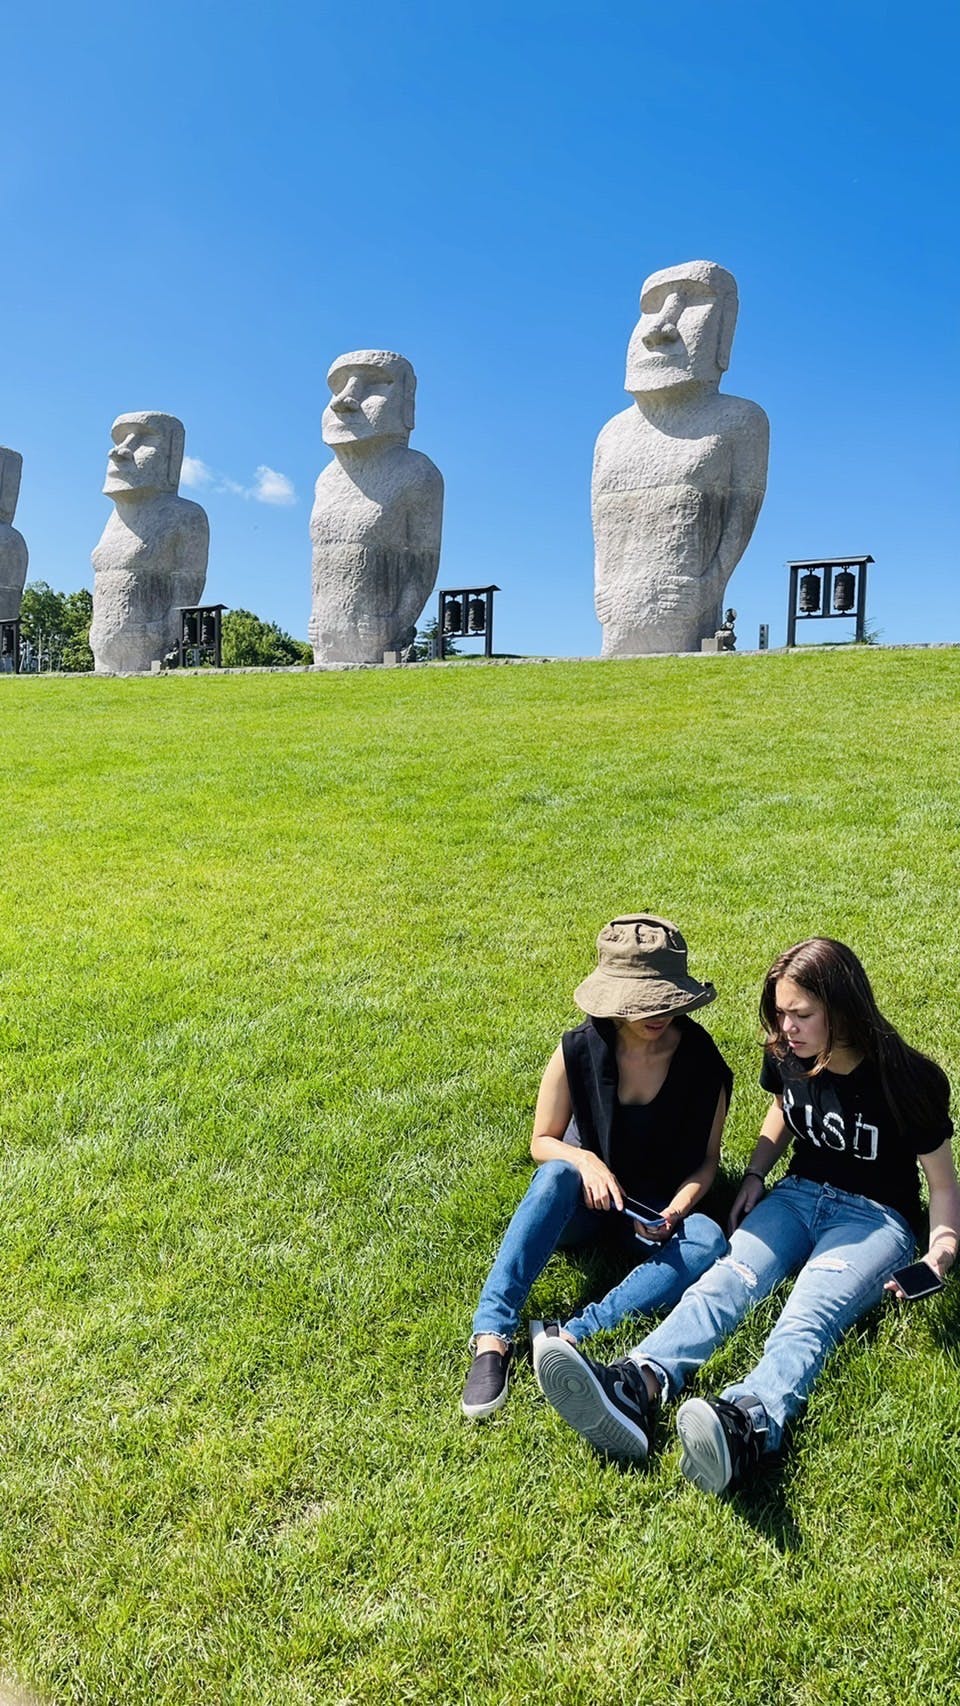 Mother and daughter on the lawn. Moai statues behind us. 